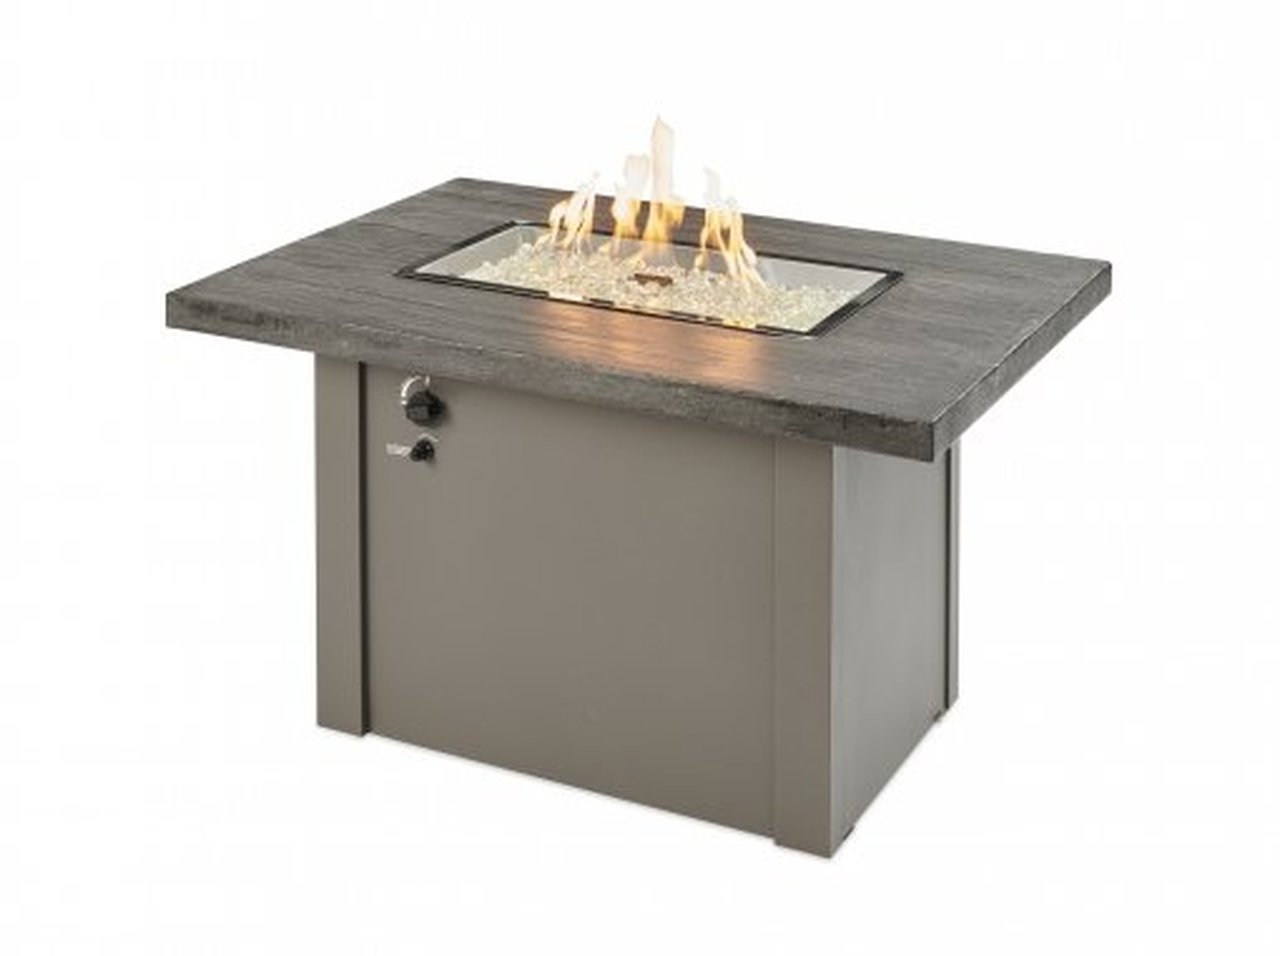 Rectangular Gas Fire Pit Table, 65 Rectangular Outdoor Propane Gas Fire Pit Table In Gray